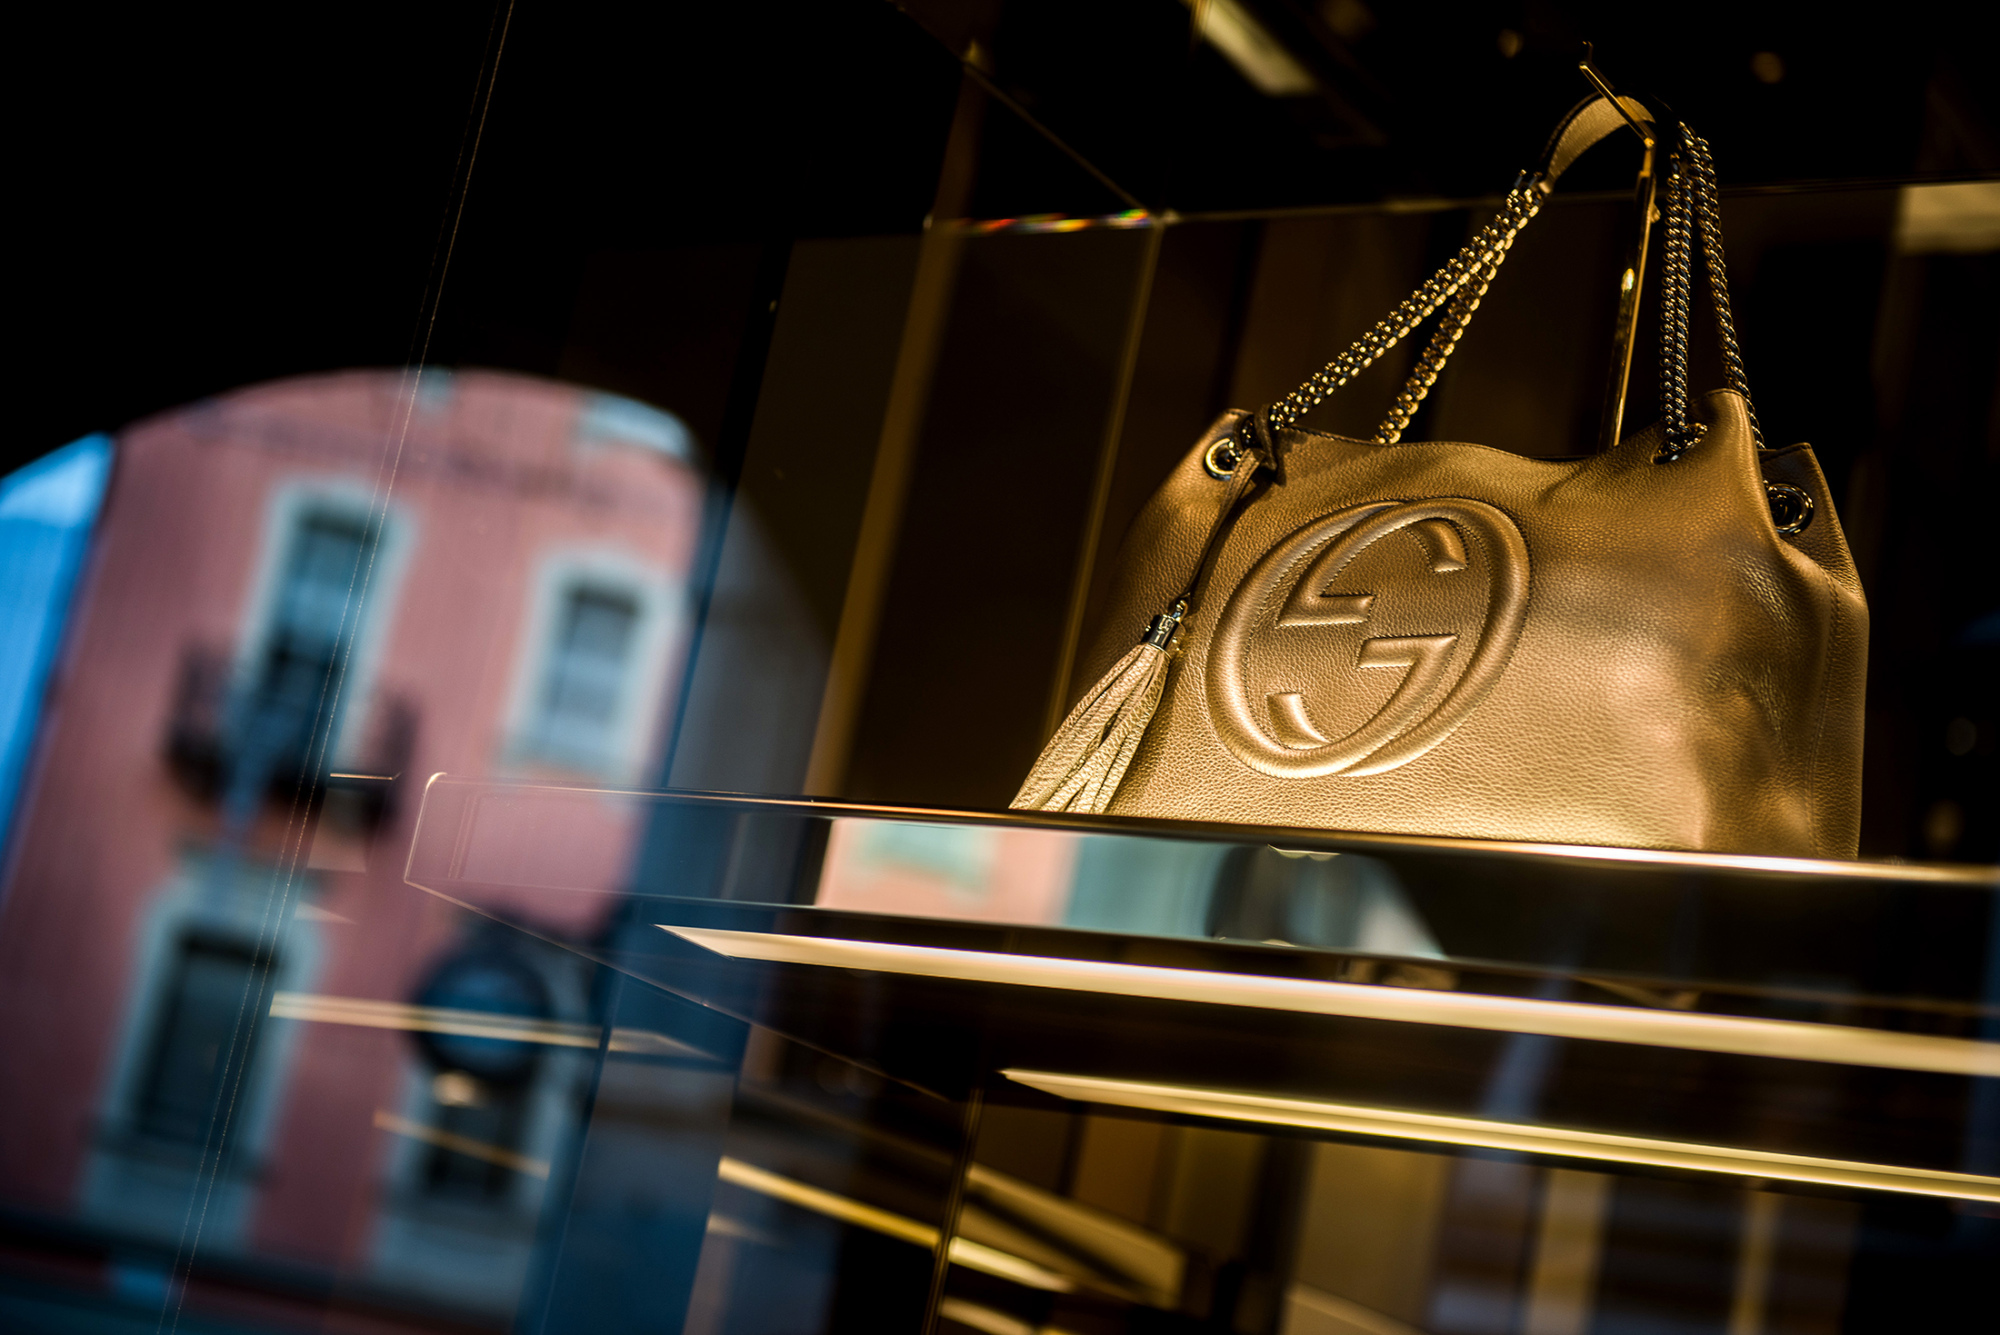 Louis Vuitton - Leather Goods Store in SoHo